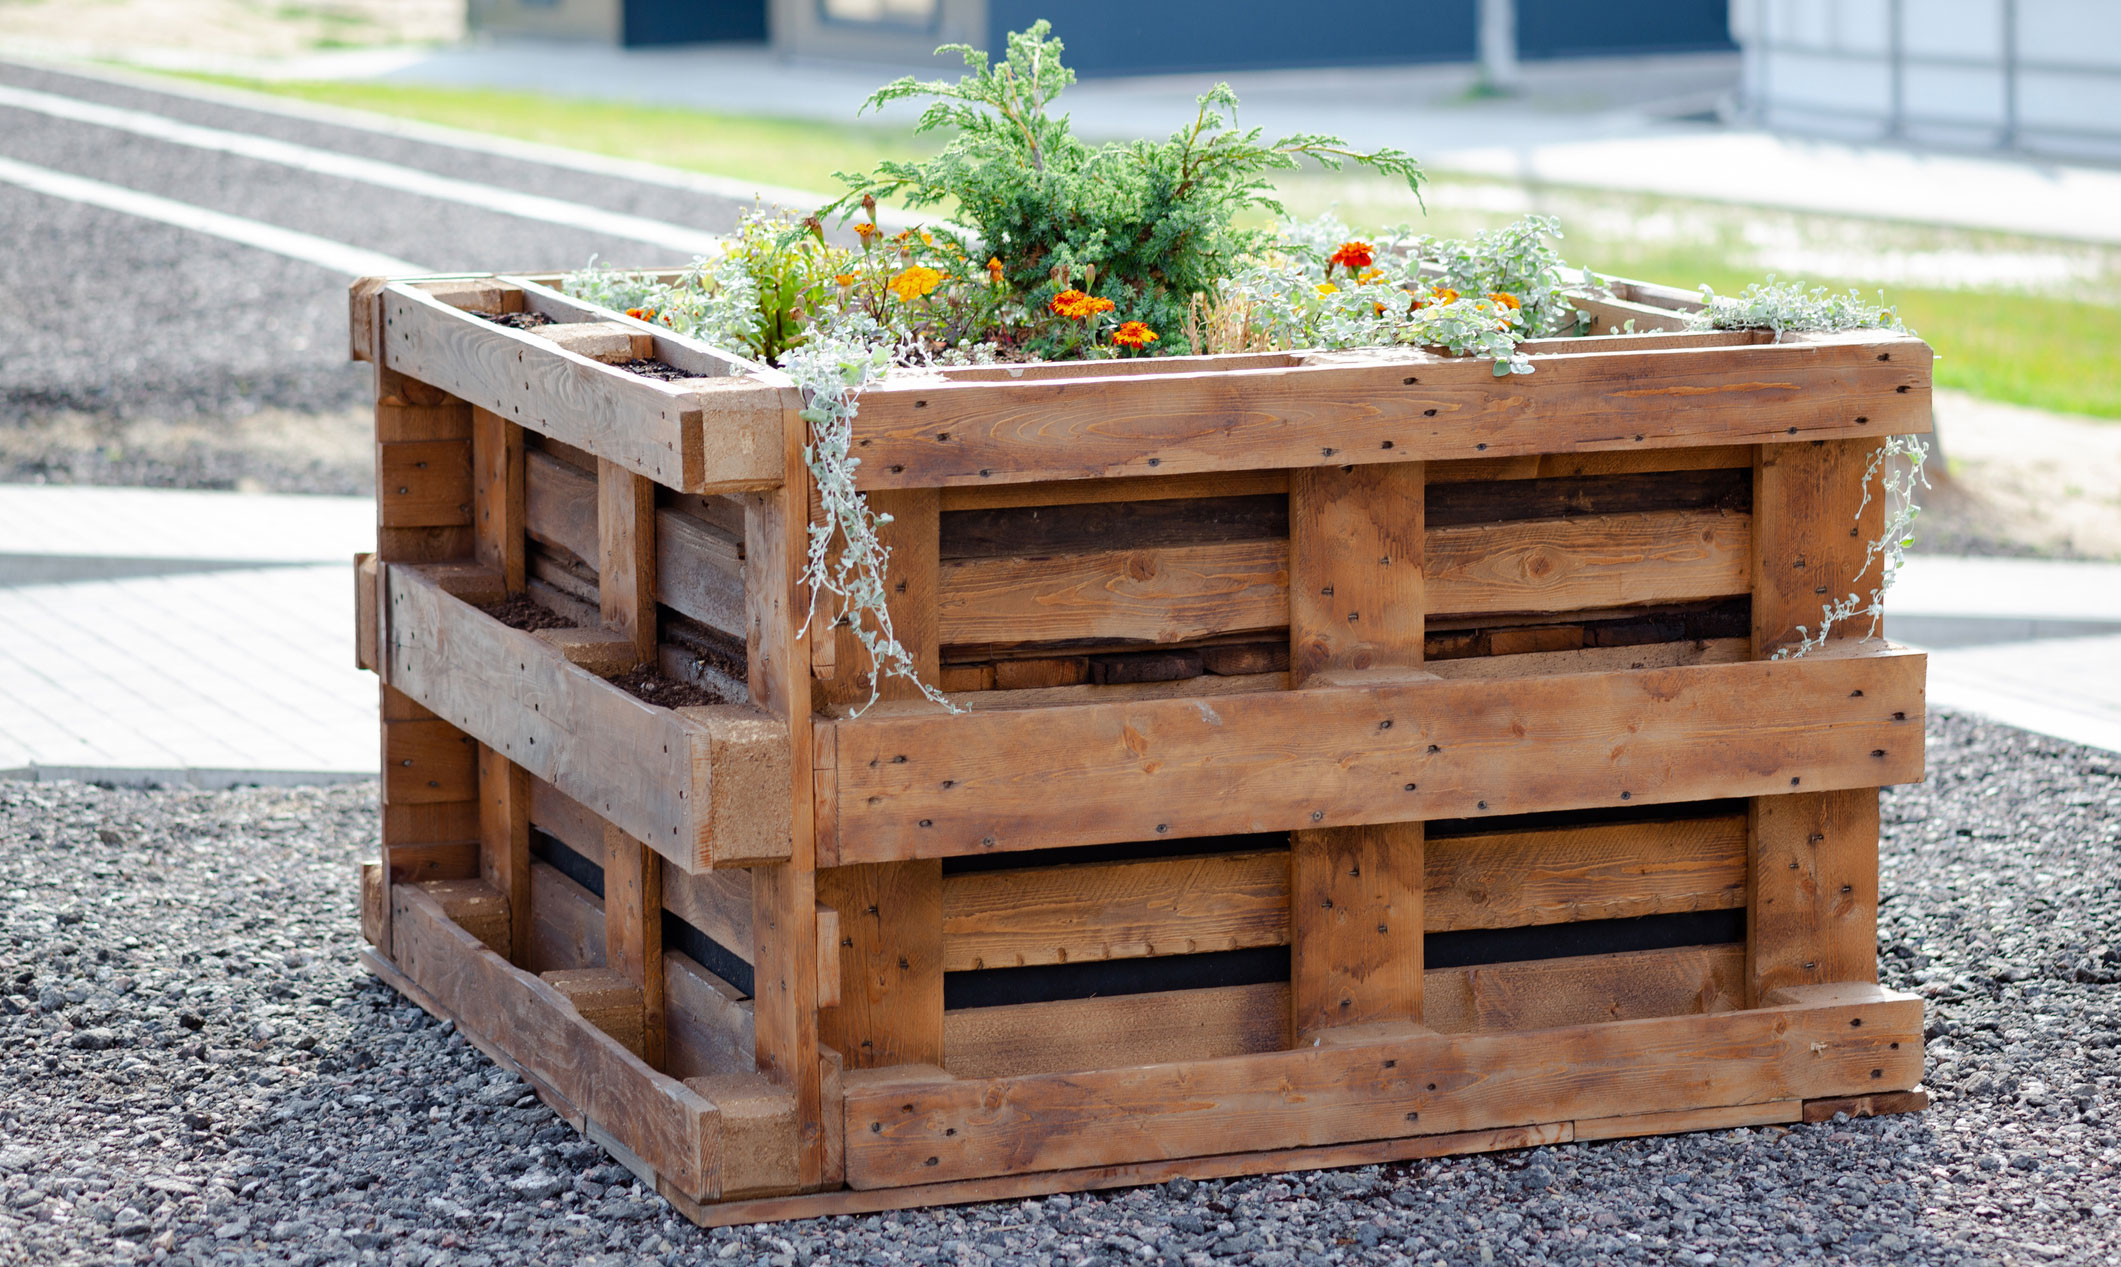 DIY raised recycled material garden bed - Lyngso